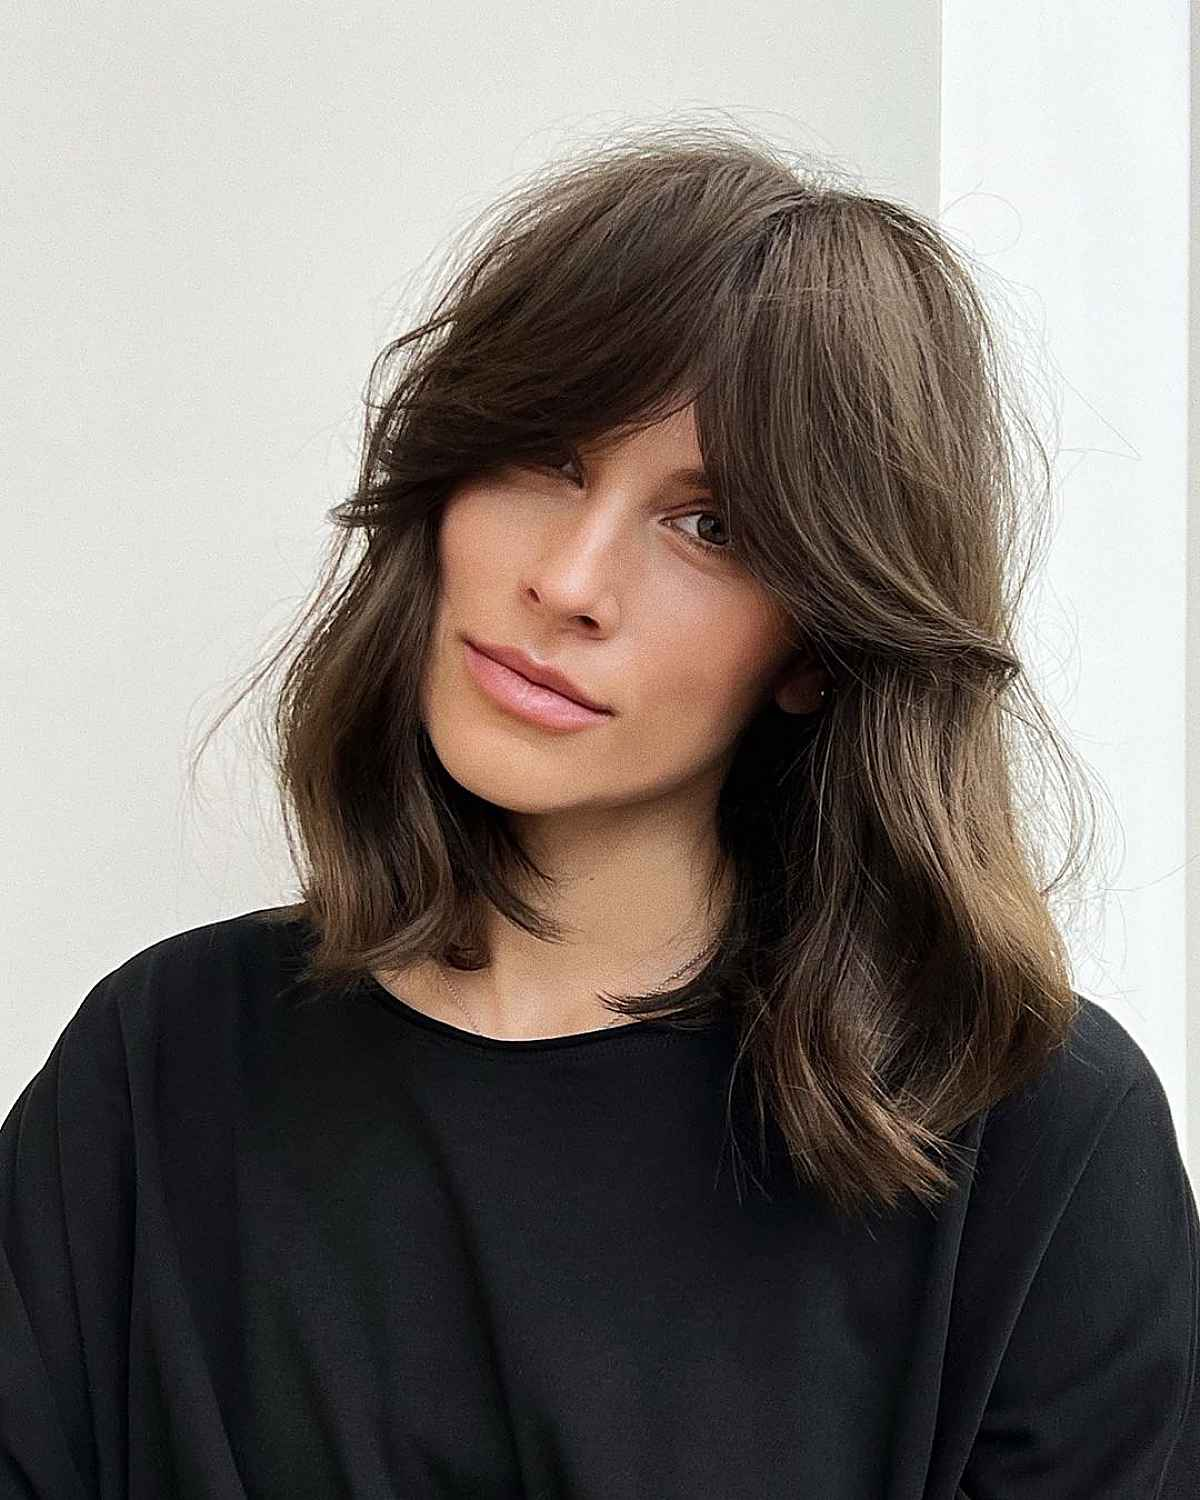 20 Classic Haircuts That Never Go Out of Style